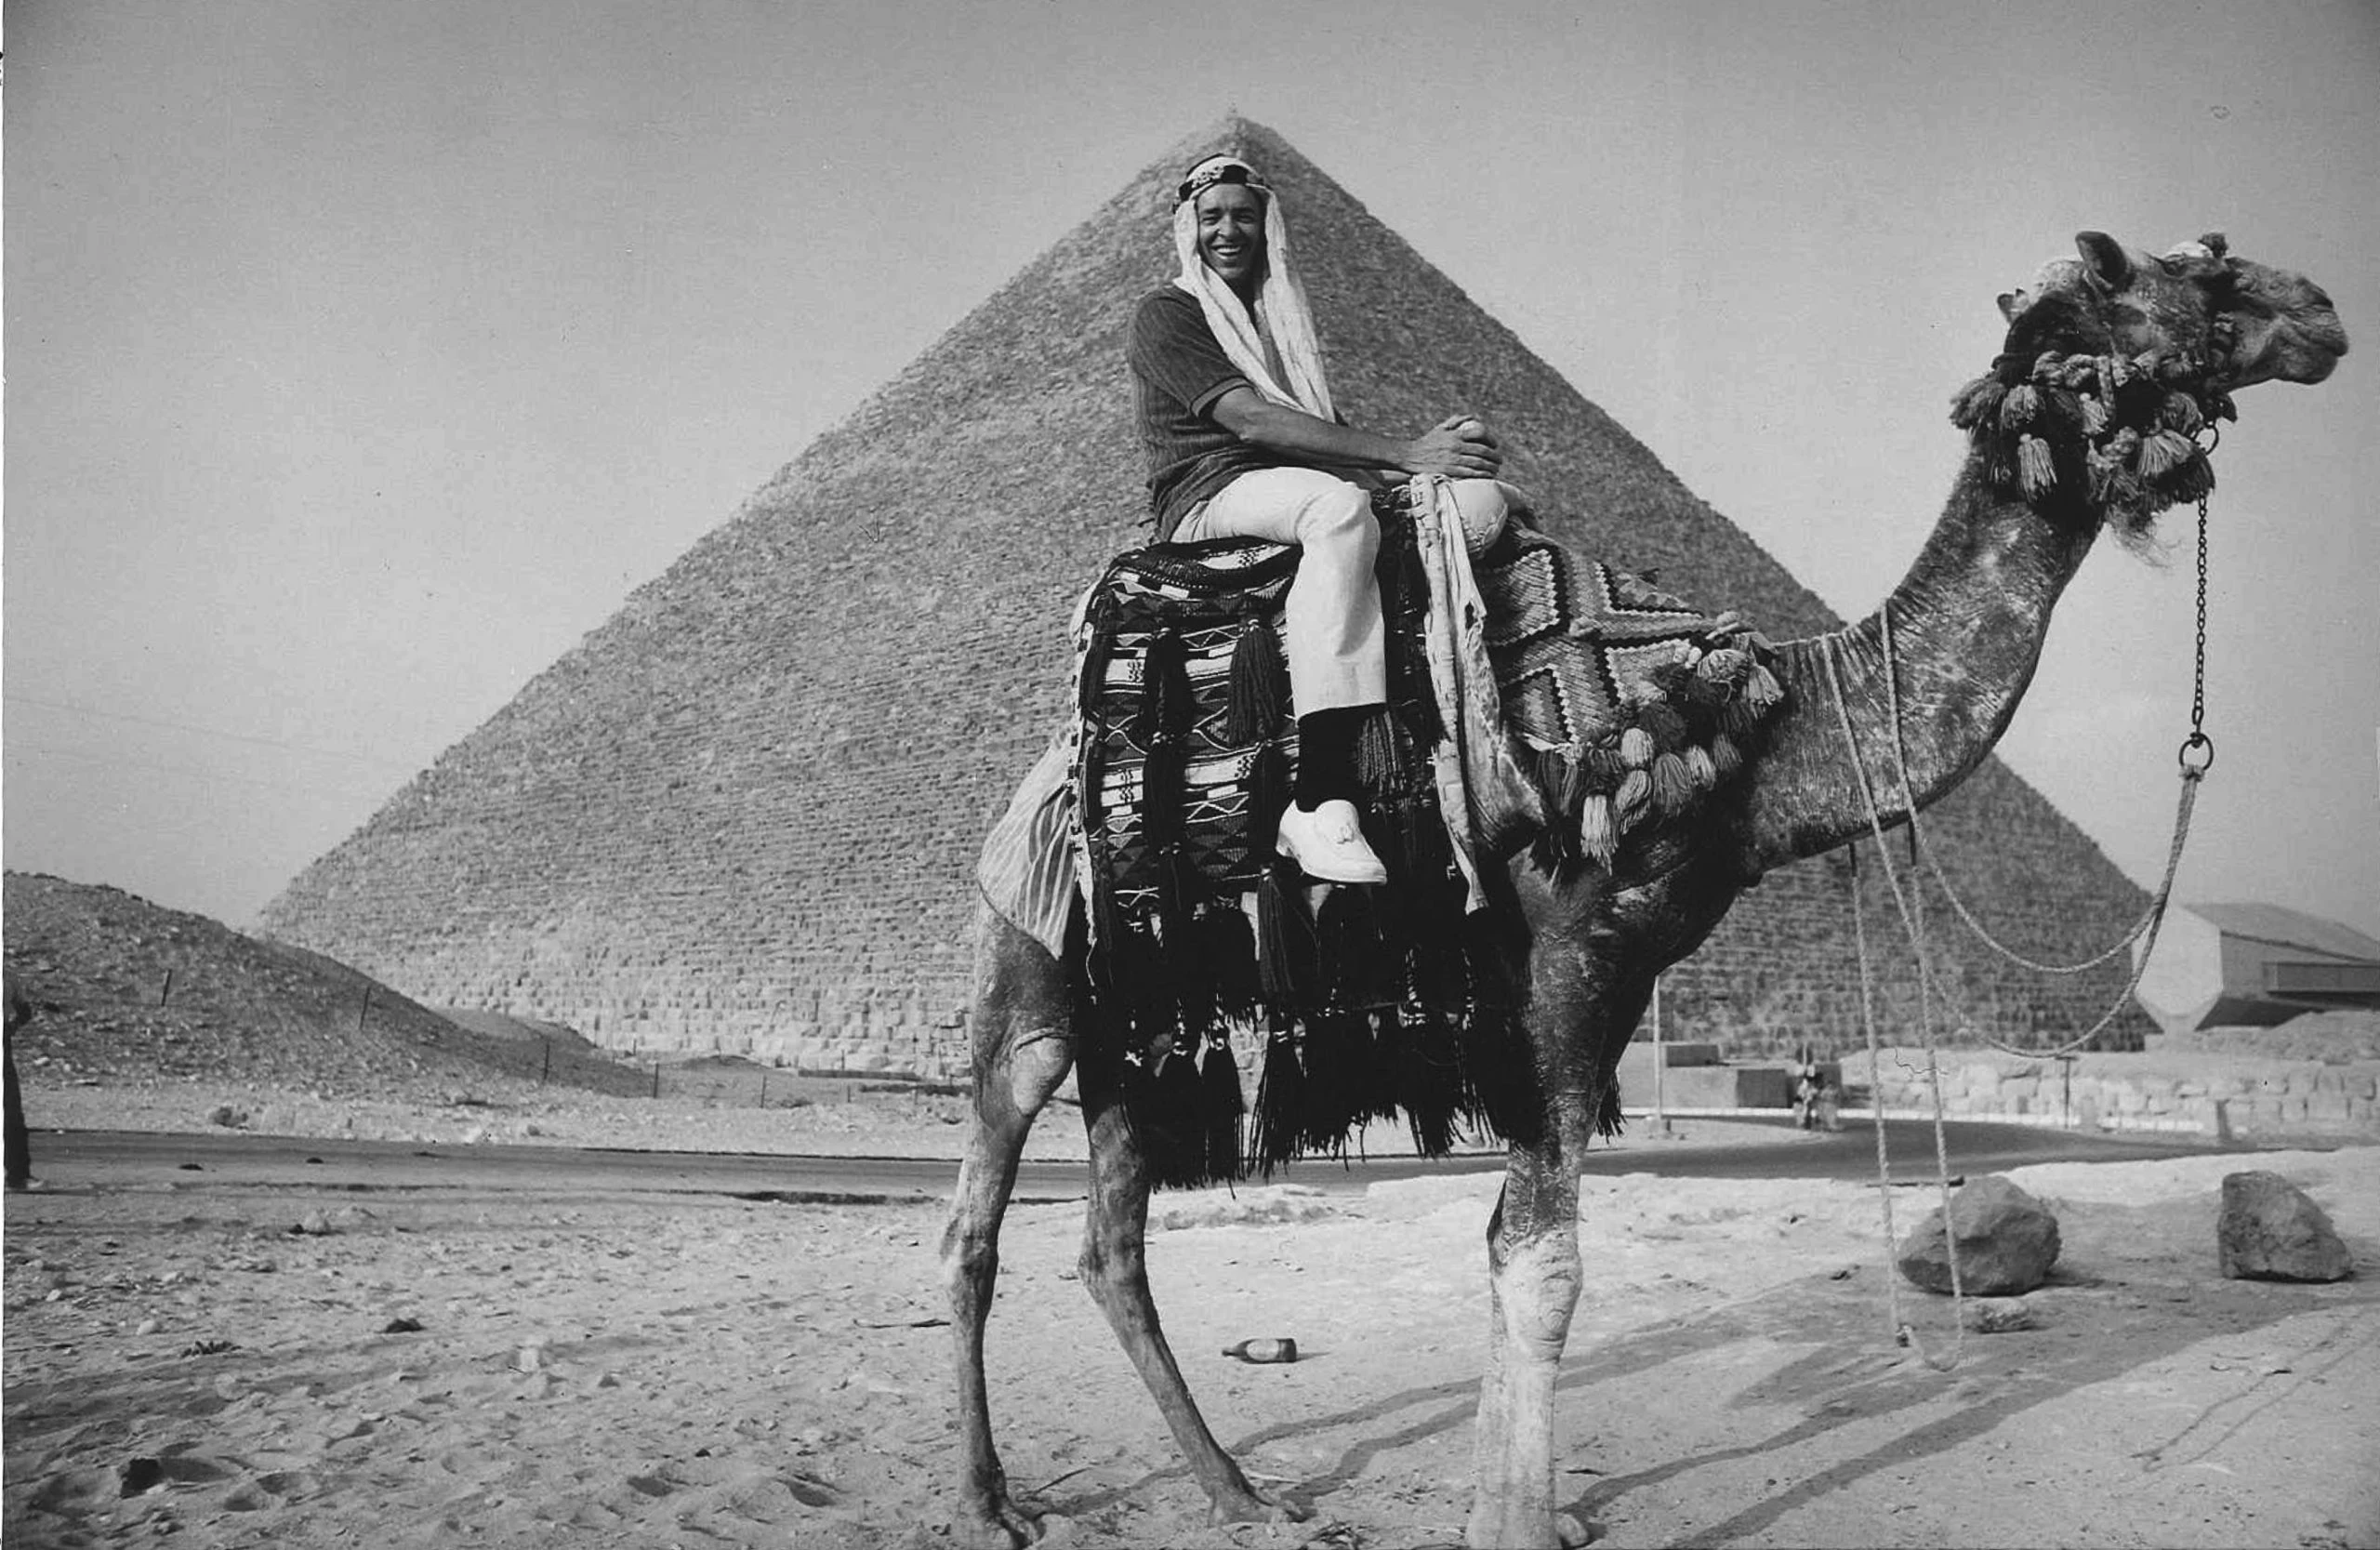 Dr. Stanley loved a good adventure. On a trip to Egypt, he made the most of an opportunity to take a ride on a camel.